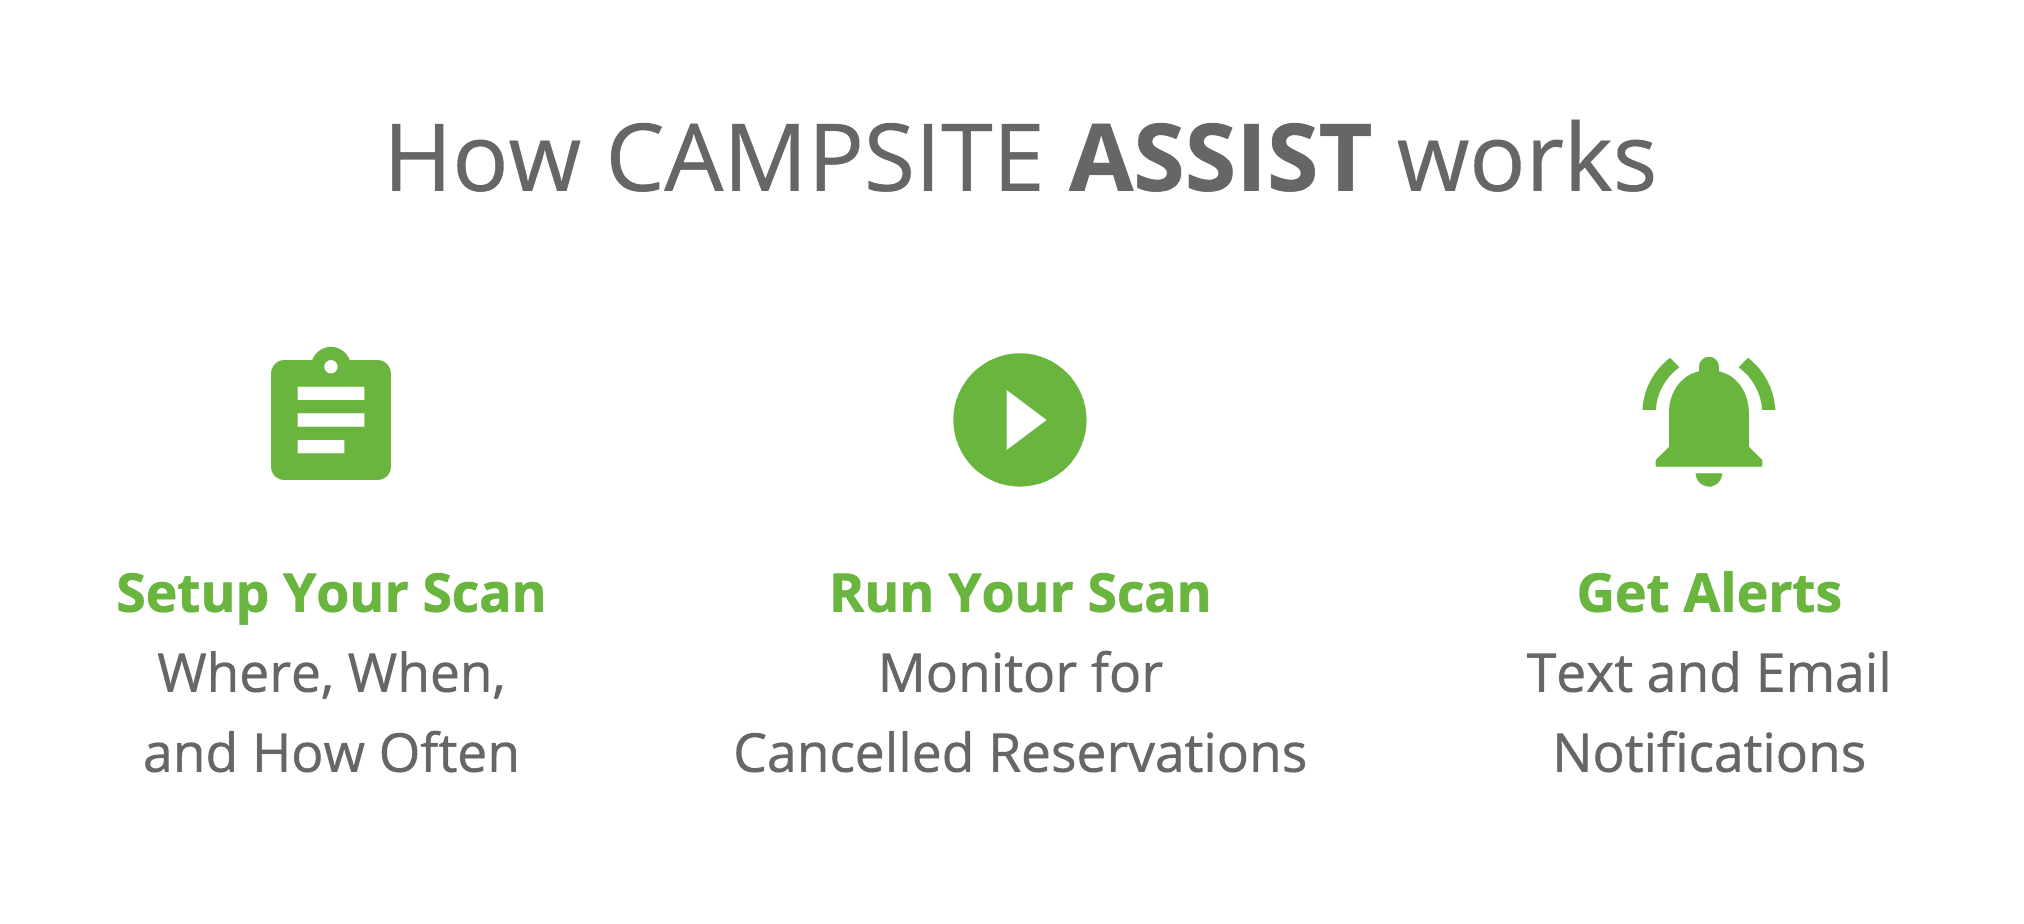 Minnesota State Parks Campsite Availability Alerts - How It Works